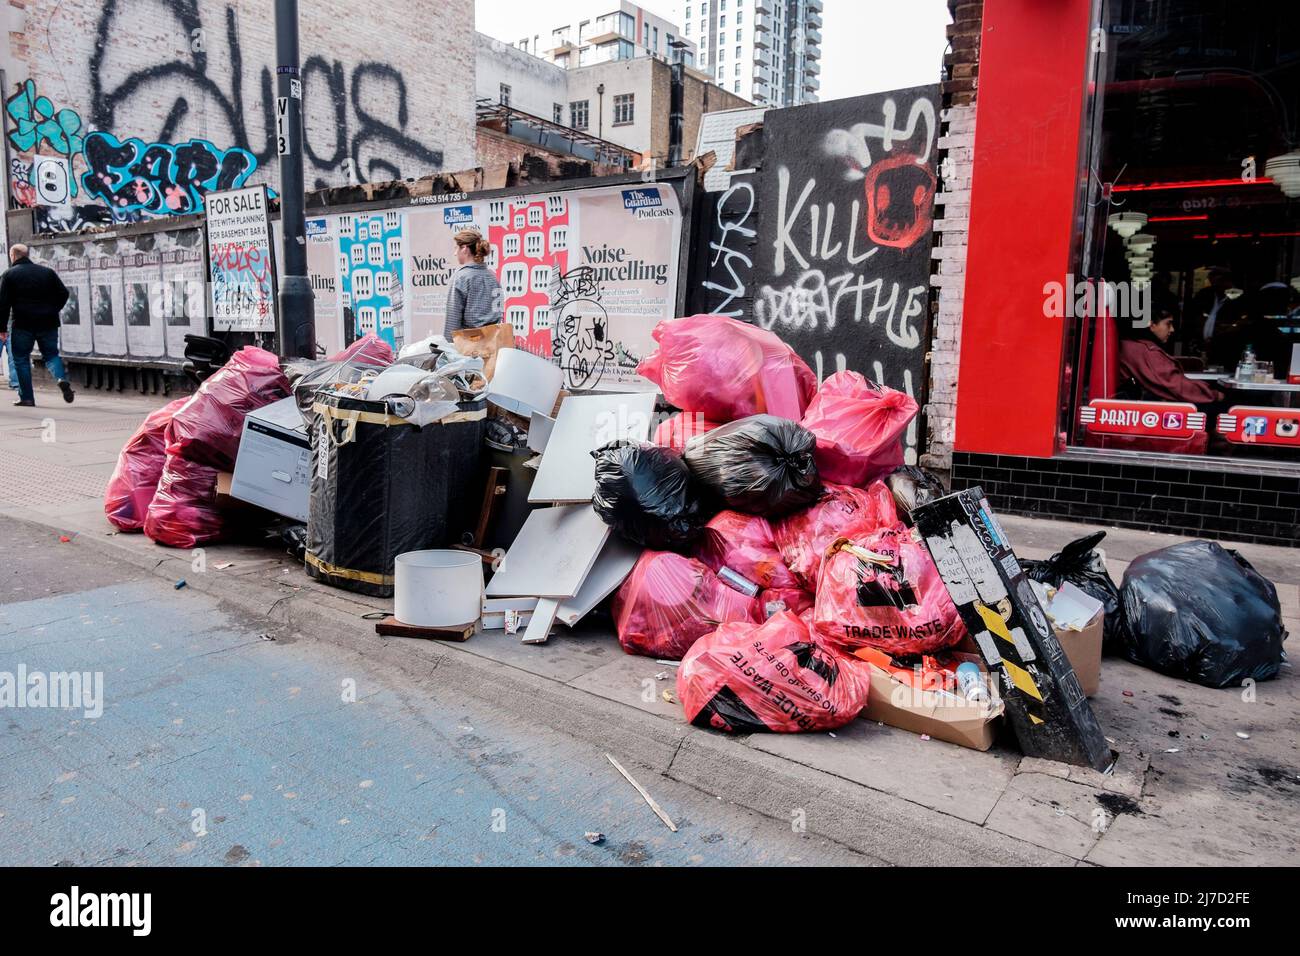 Bags of trade waste and other rubbish piled at roadside. Whitechapel, London, UK. Stock Photo